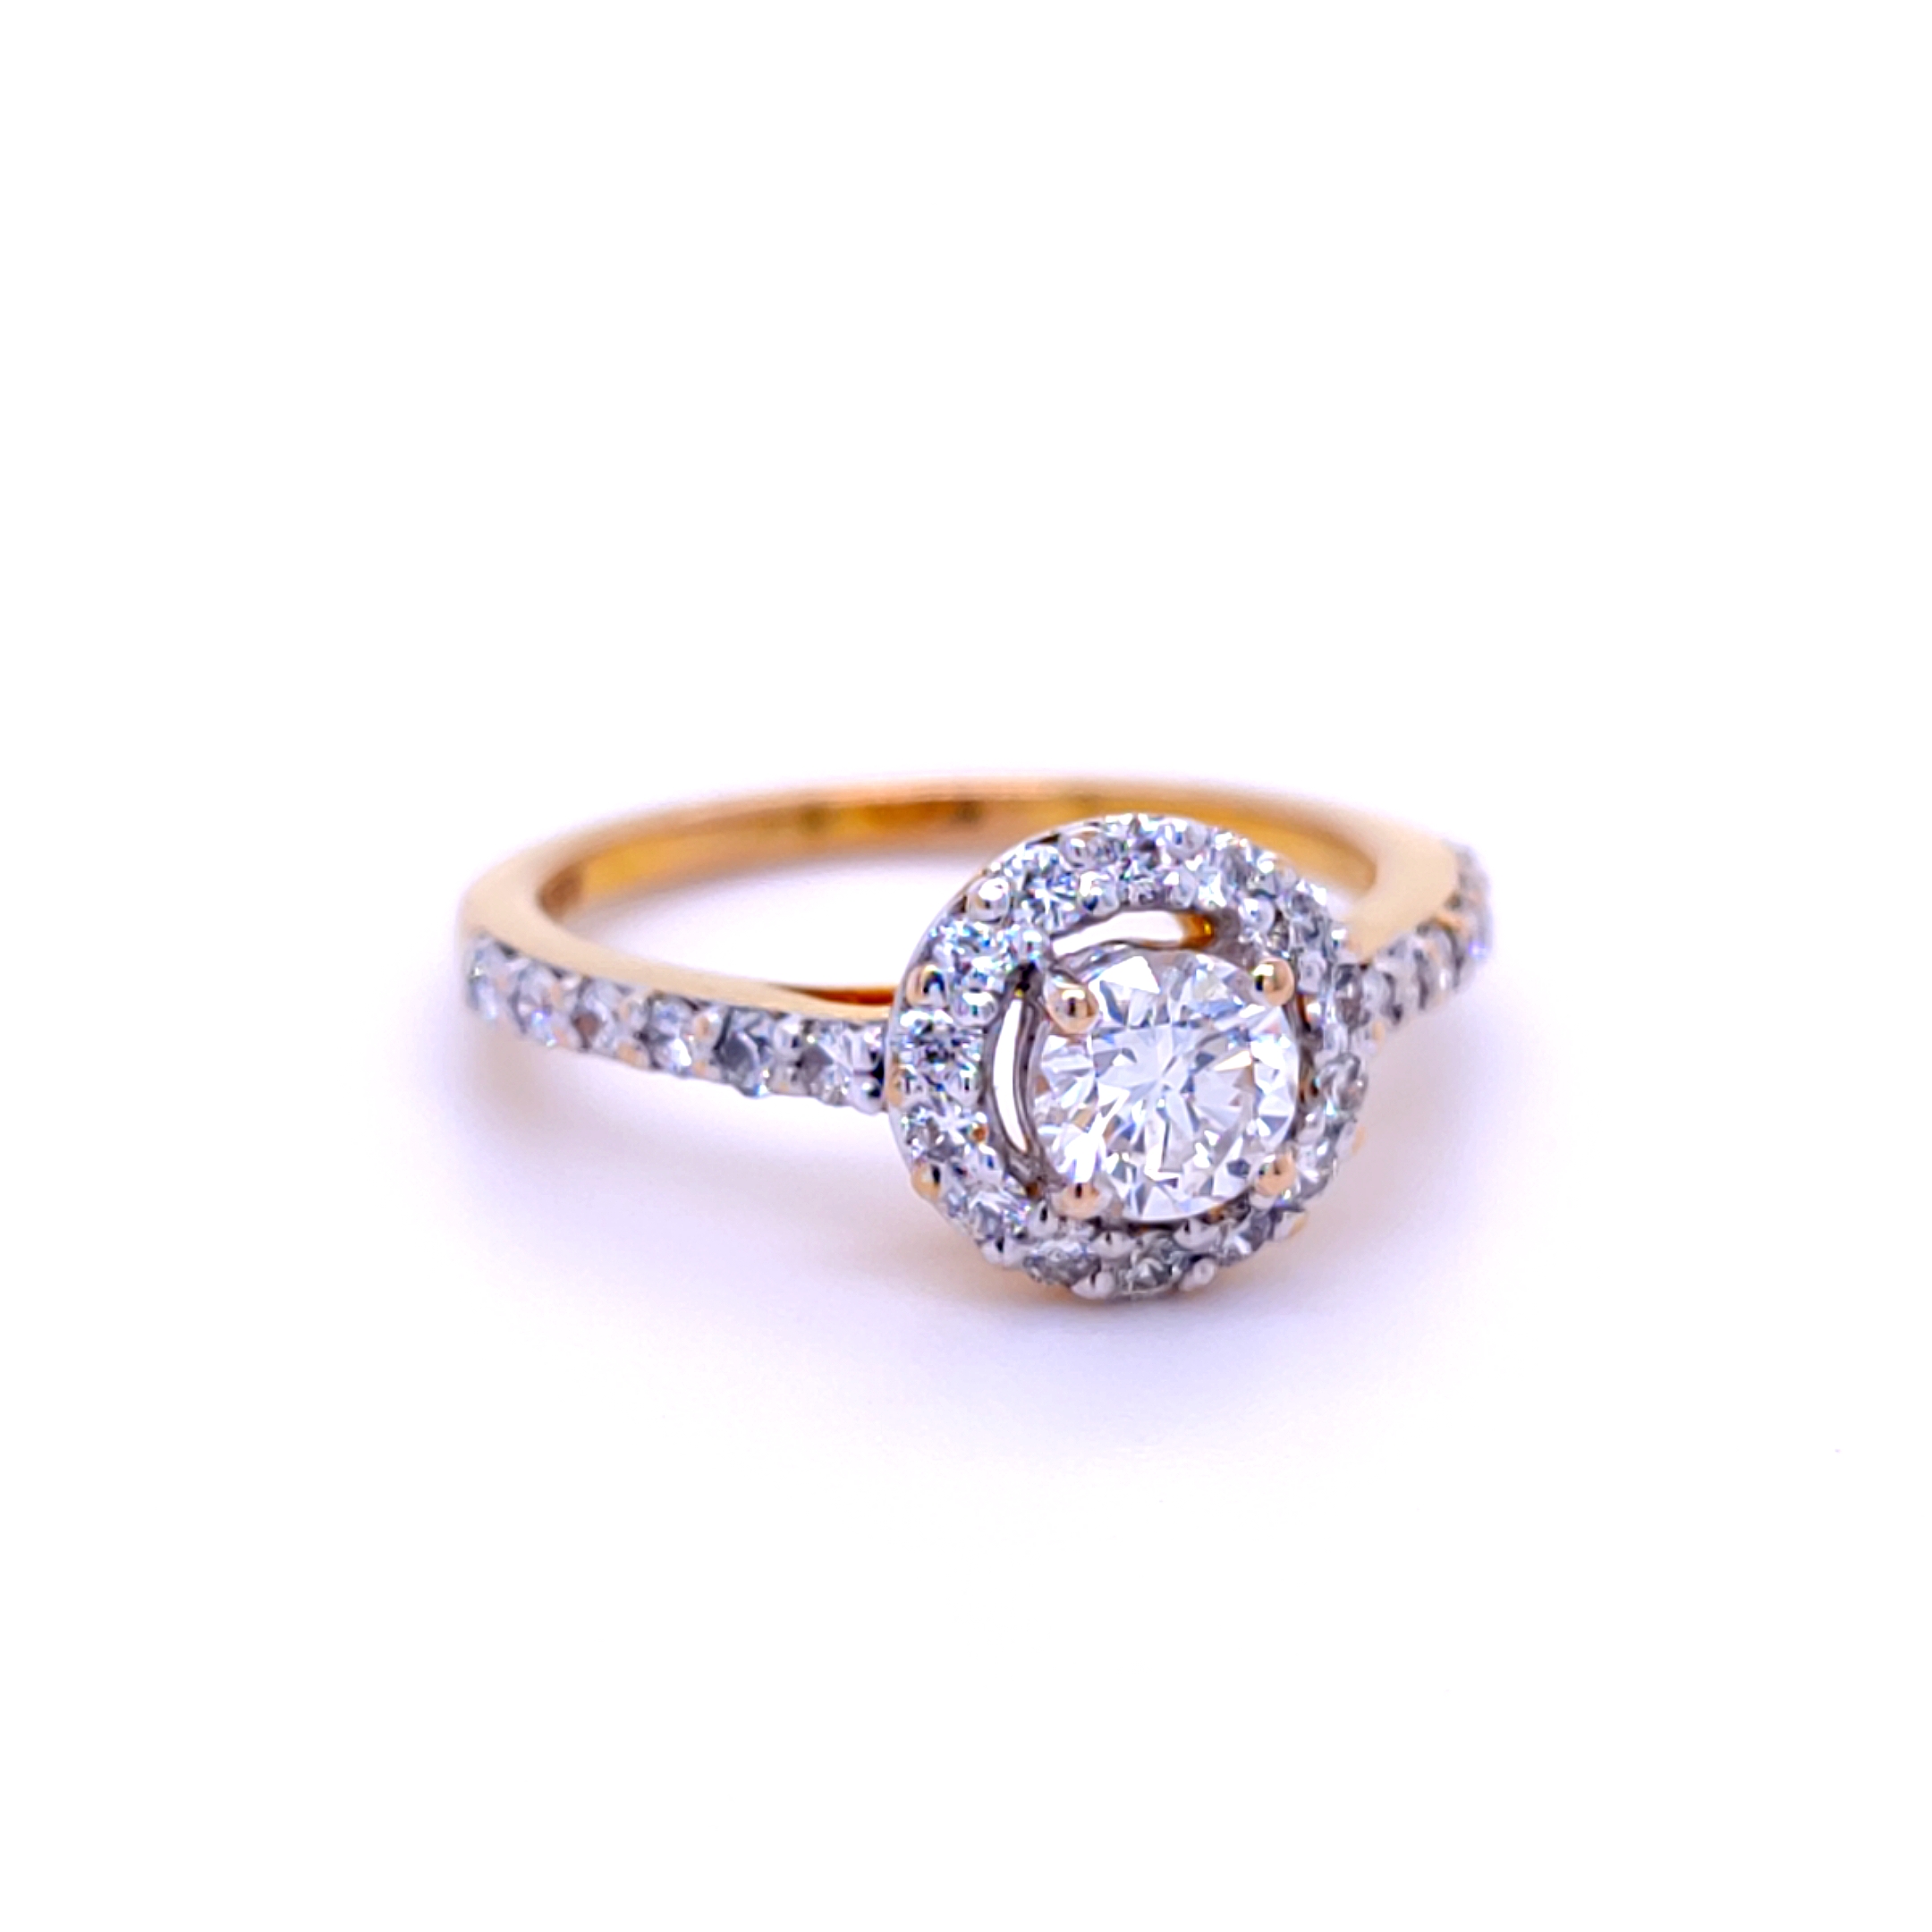 Beautiful solitaire diamond engagement ring in 18kt gold